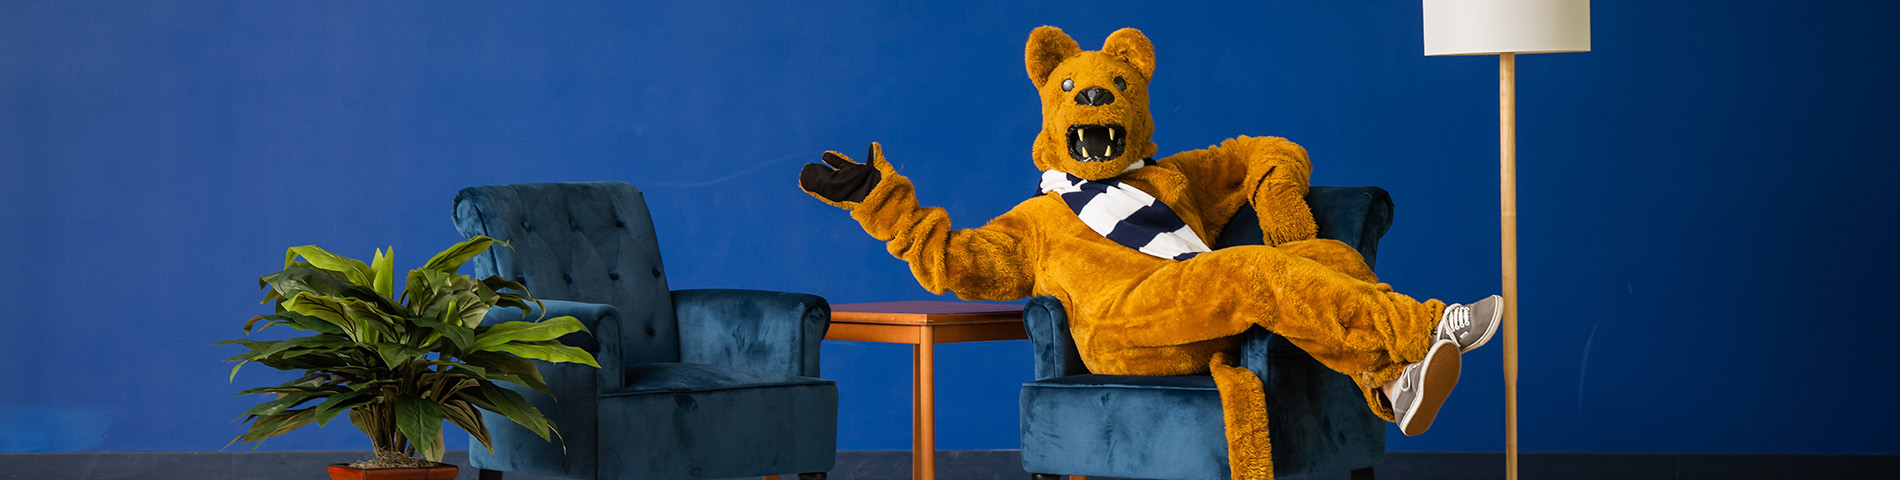 Lion mascot sitting in one of two blue armchairs on a stage